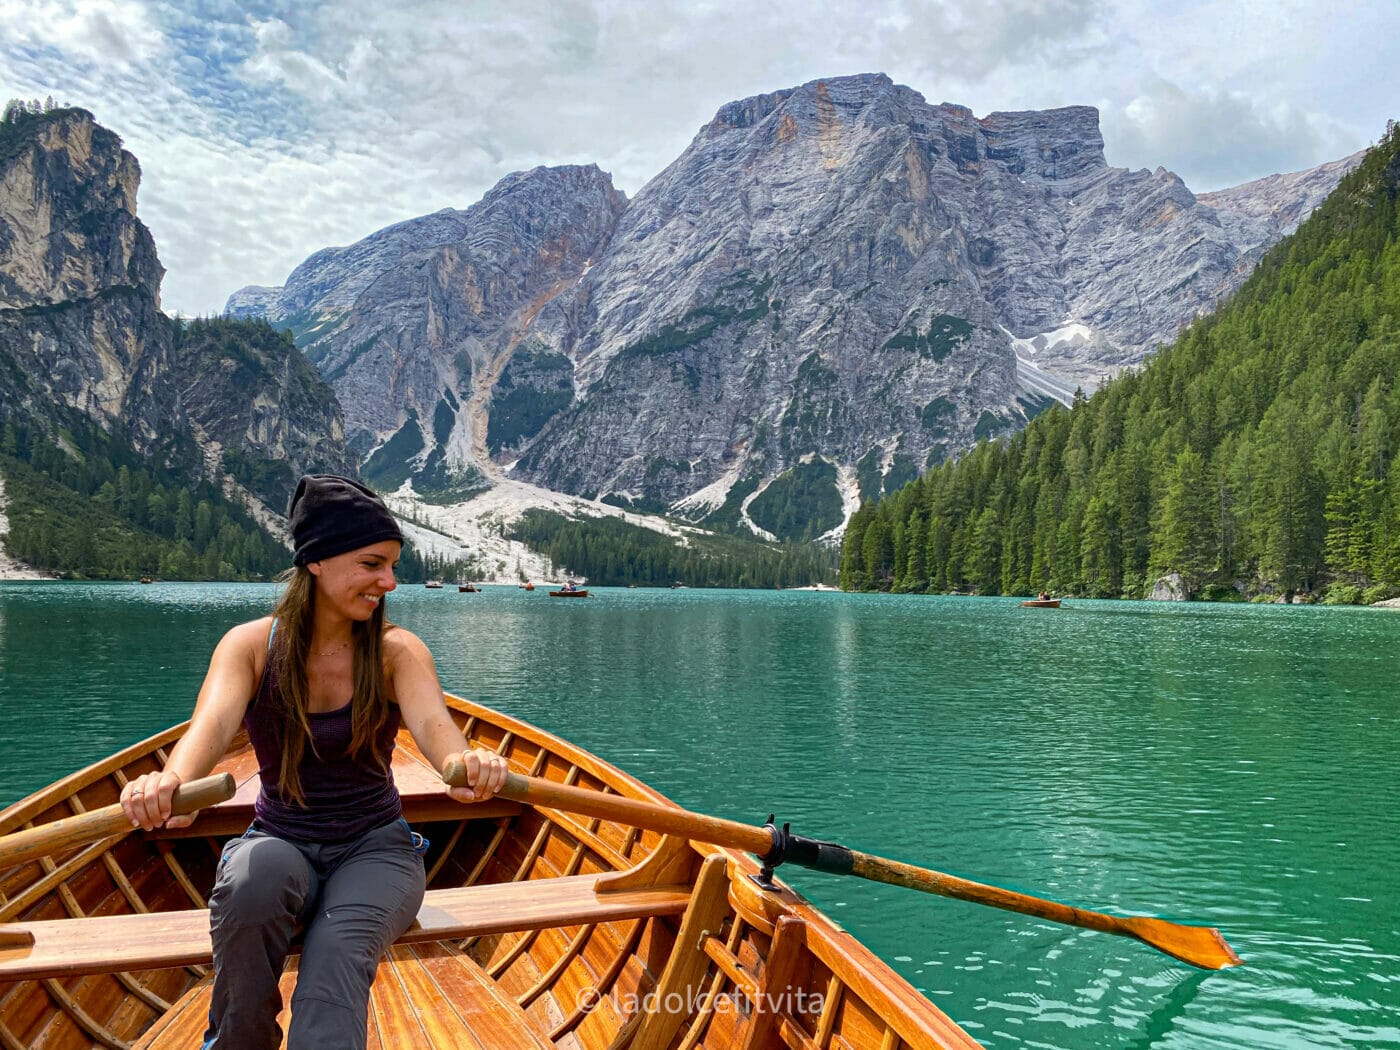 woman rowing a boat in lago di braies, the emerald lake of the dolomites